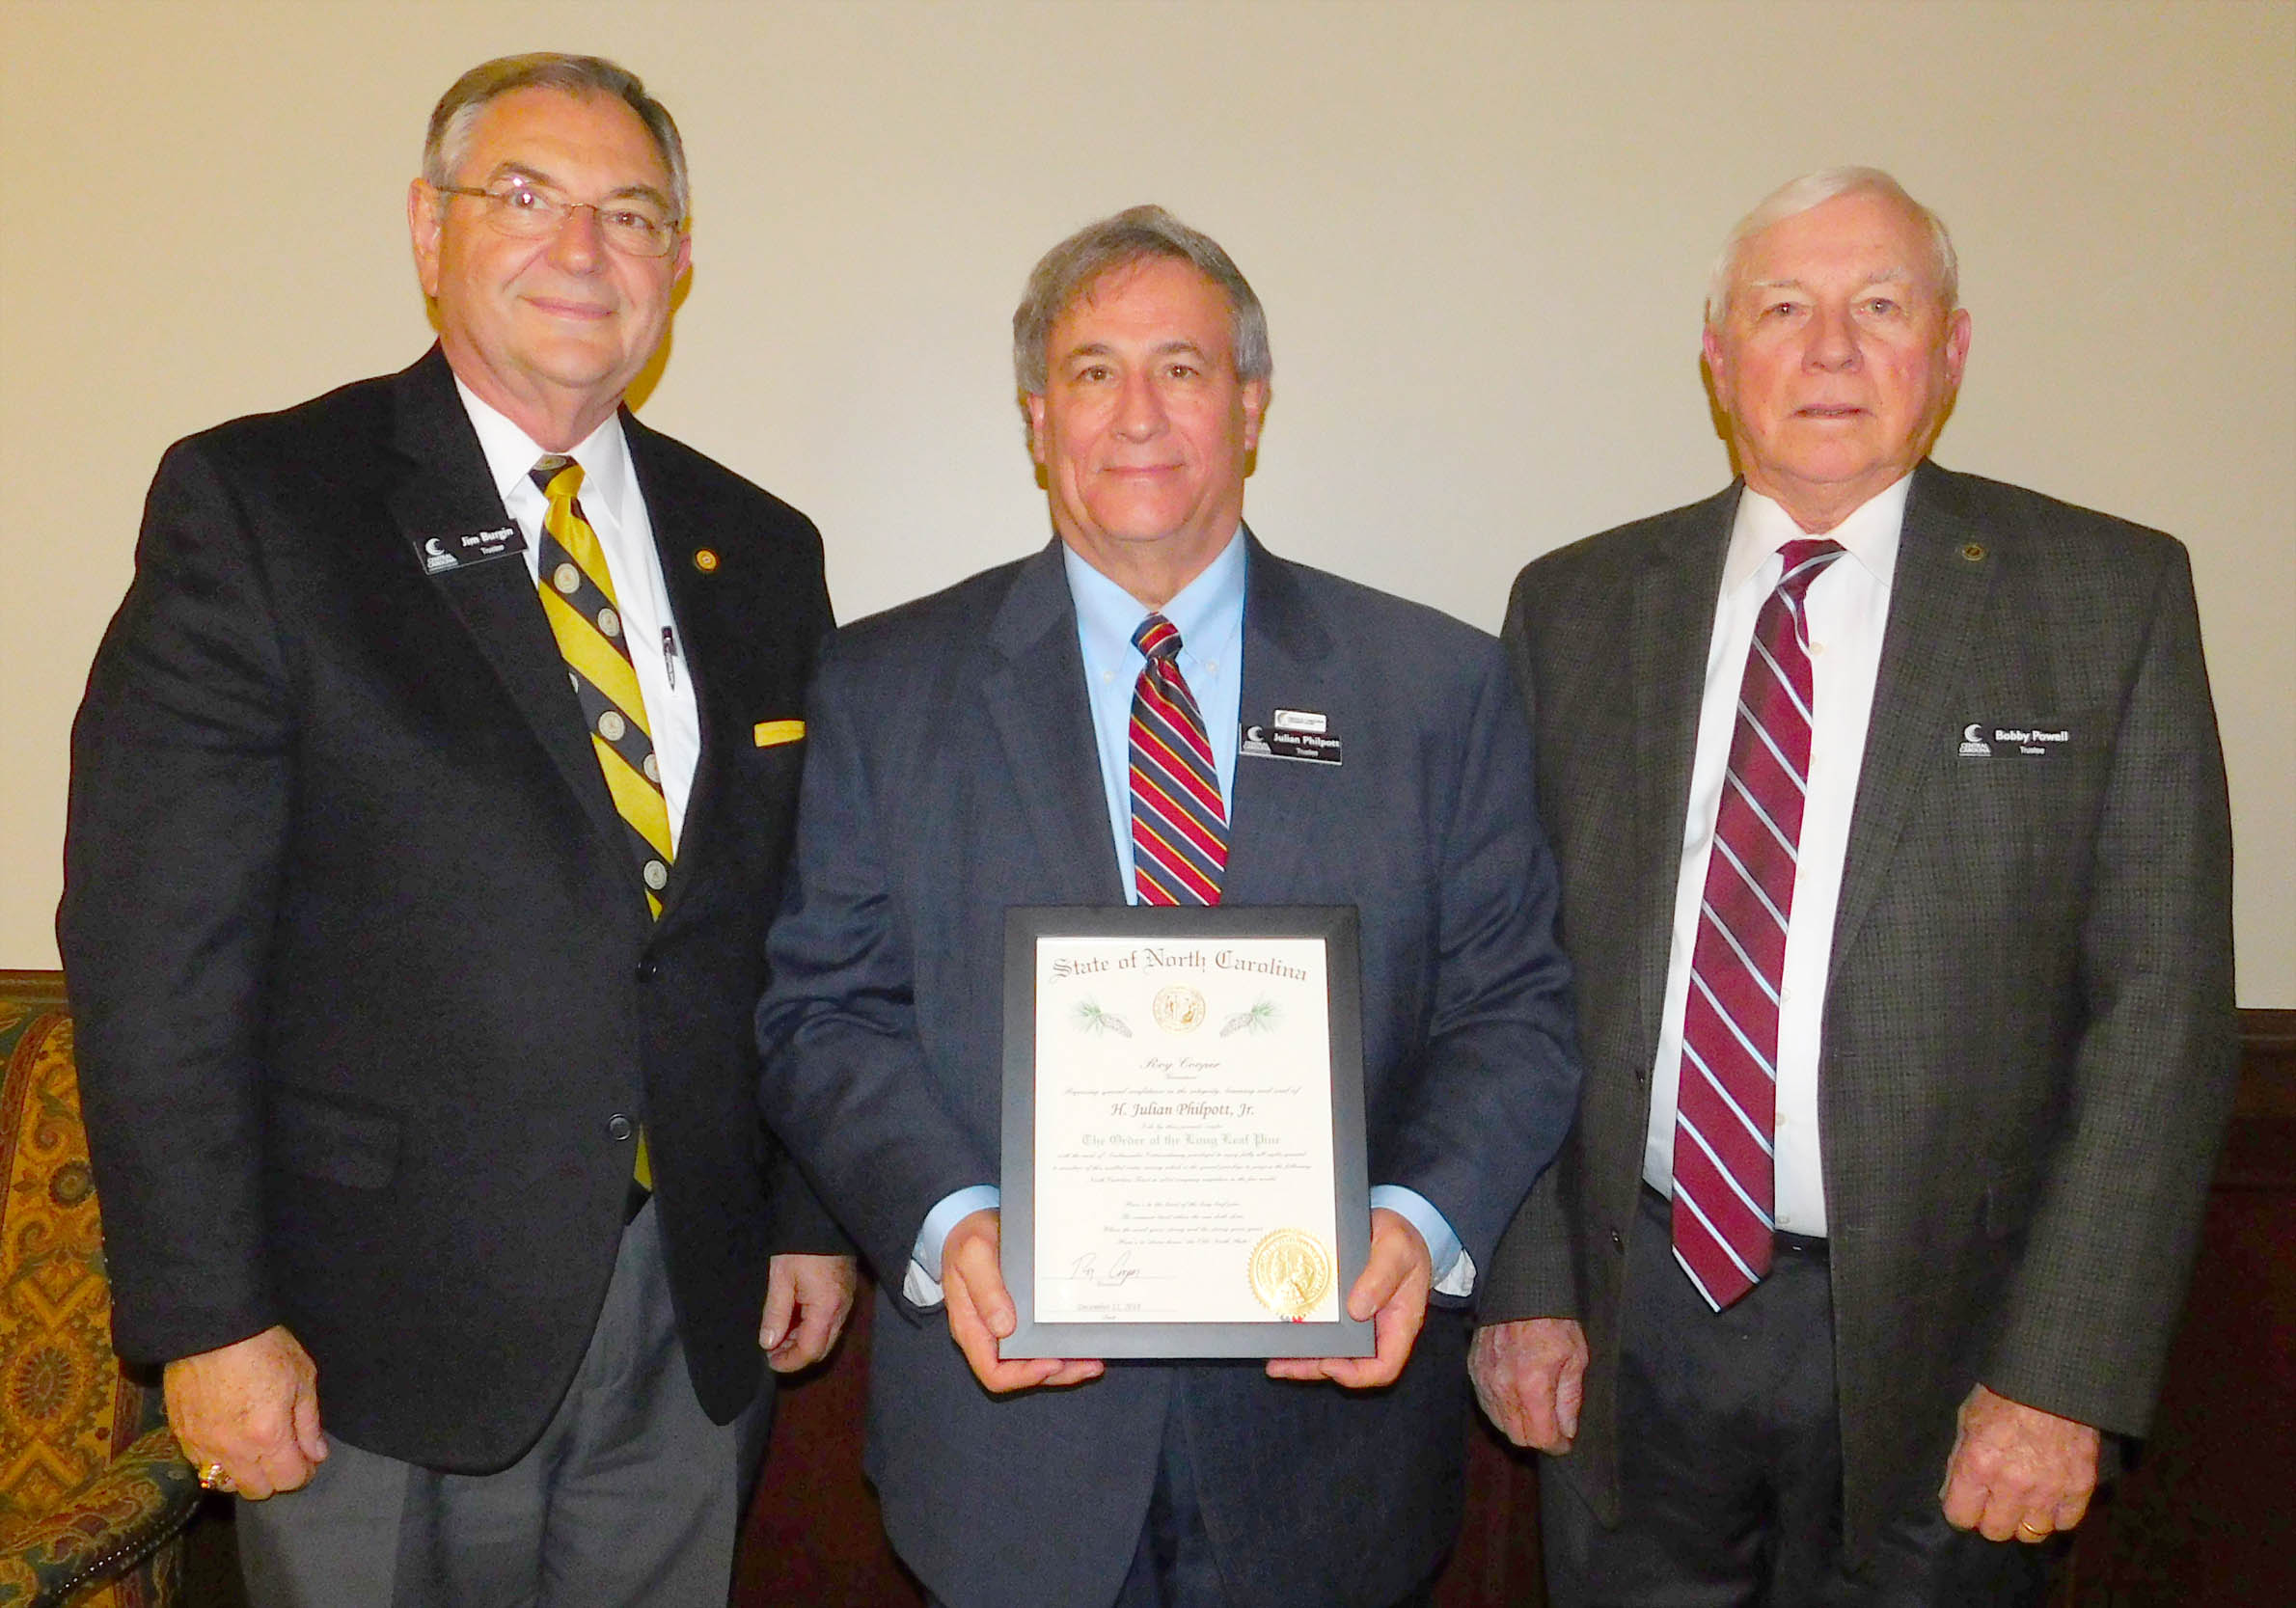 Click to enlarge,  H. Julian Philpott Jr. (center), Chairman of the Central Carolina Community College Board of Trustees, recently received The Order of the Long Leaf Pine, a prestigious award given by the Governor of North Carolina. Philpott is a corporate attorney who has spent the last 30 years working as a lobbyist and general counsel for the nonprofit North Carolina Farm Bureau Federation and its affiliated companies. He is now a Senior Partner with Hayes Group Consulting. Pictured with Philpott are two other members of the CCCC Board of Trustees who also have received The Order of the Long Leaf Pine -- State Sen. Jim Burgin (left) and L.W. "Bobby" Powell (right). 